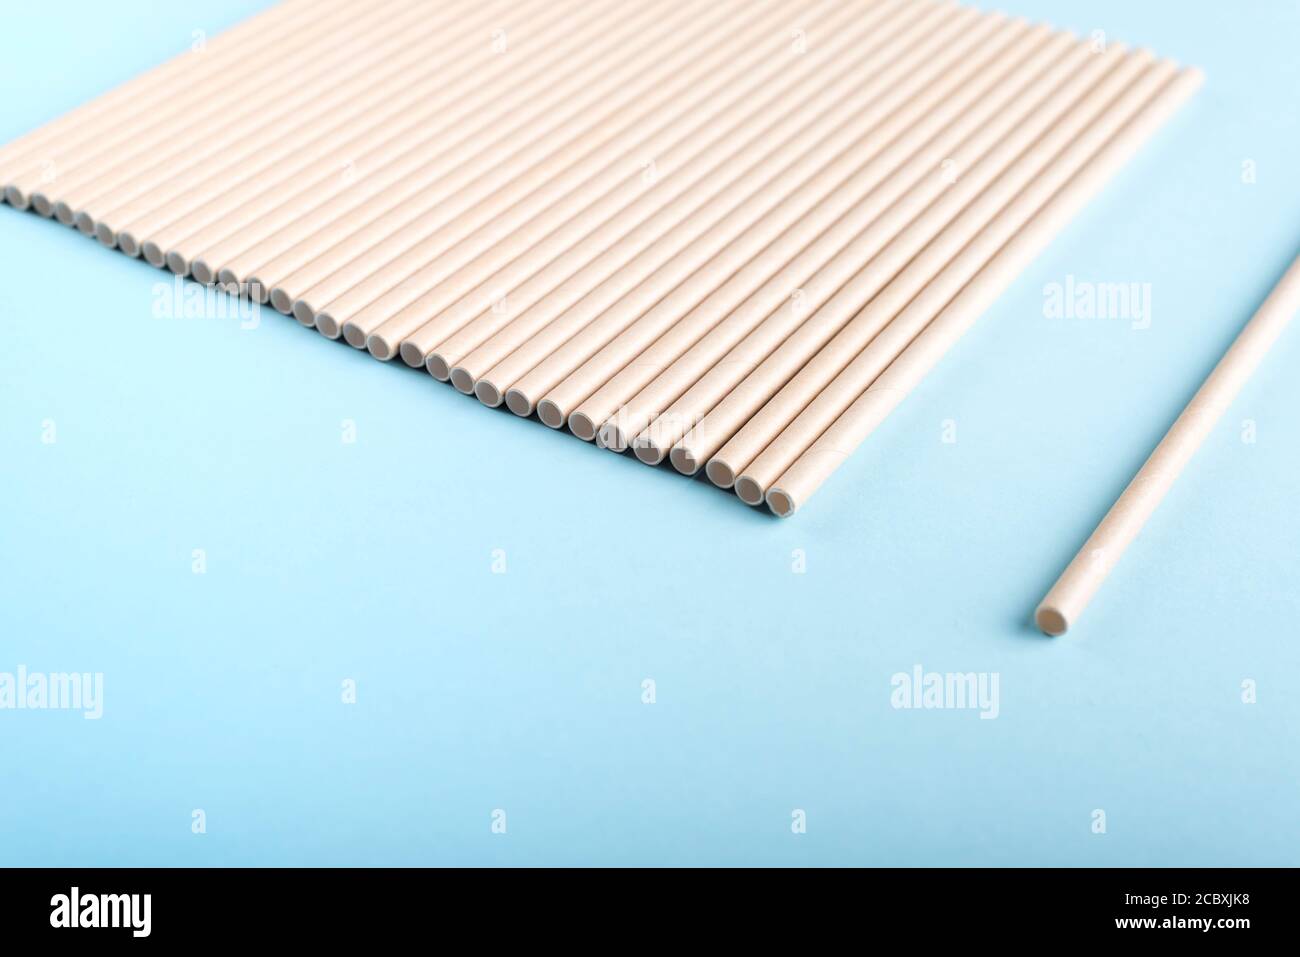 Paper drinking straws on light blue background. Stock Photo